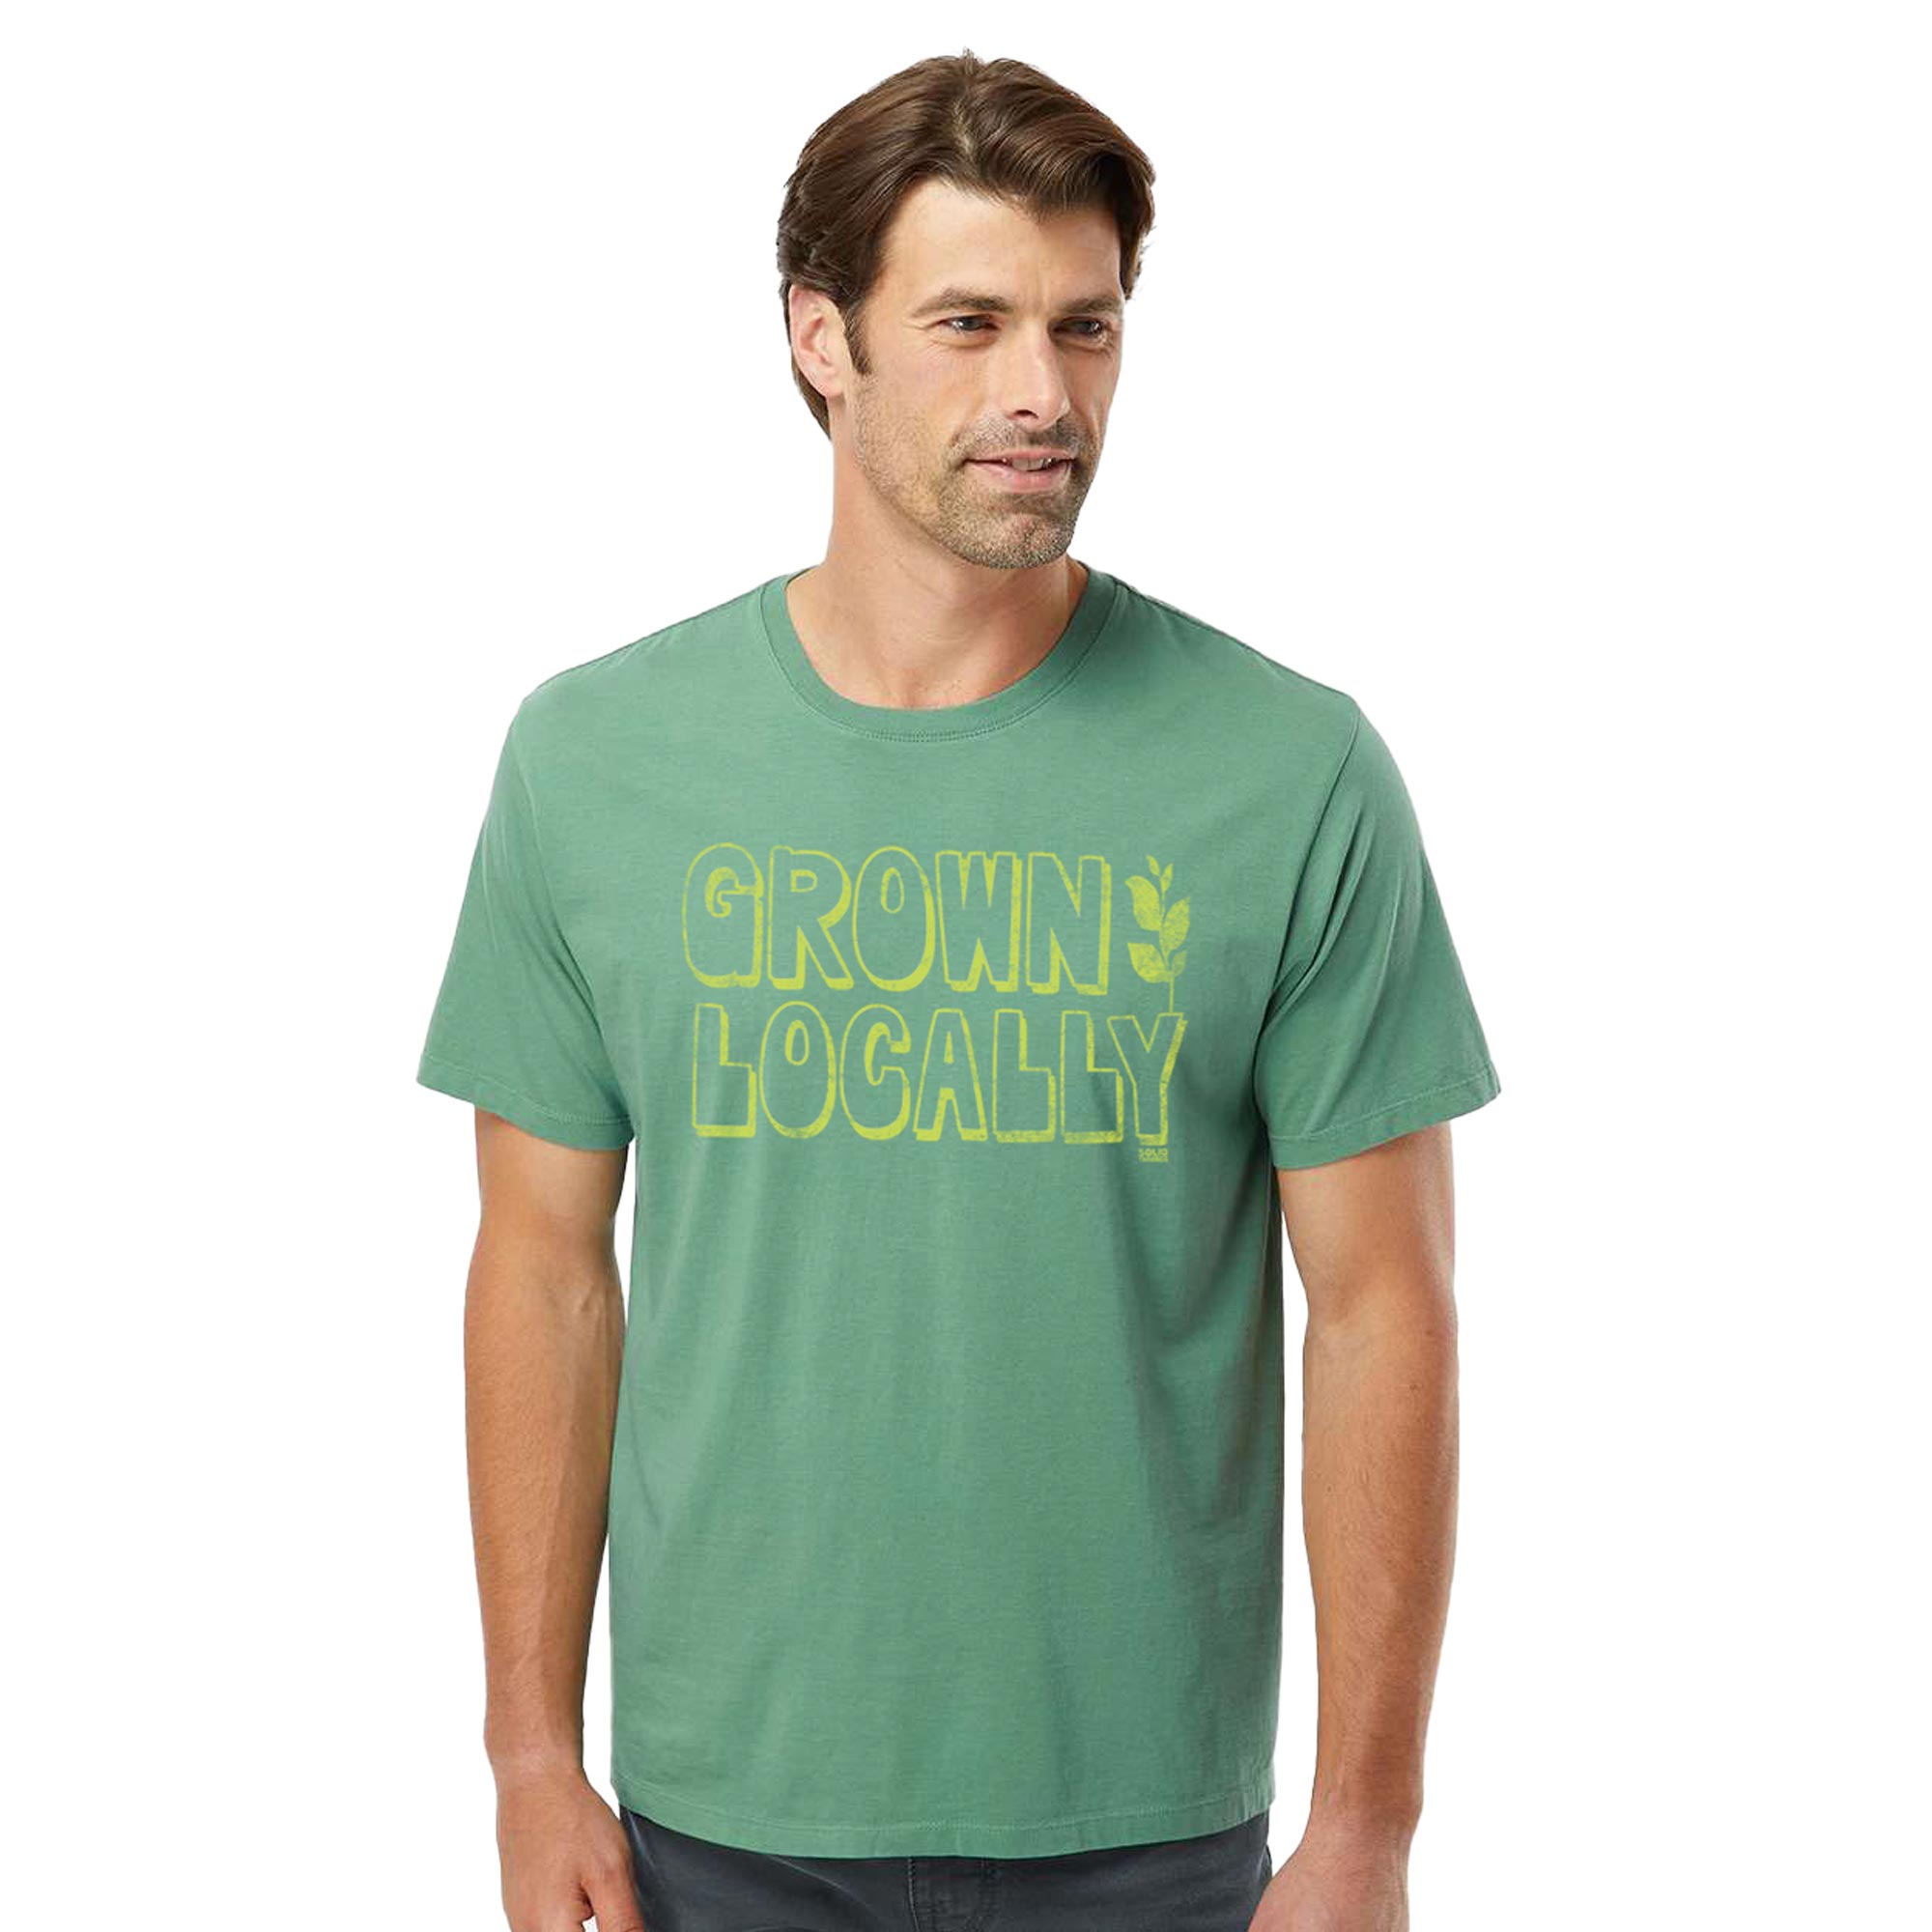 Grown Locally Cool Organic Cotton T-shirt | Vintage Farm To Table Tee On Model | Solid Threads